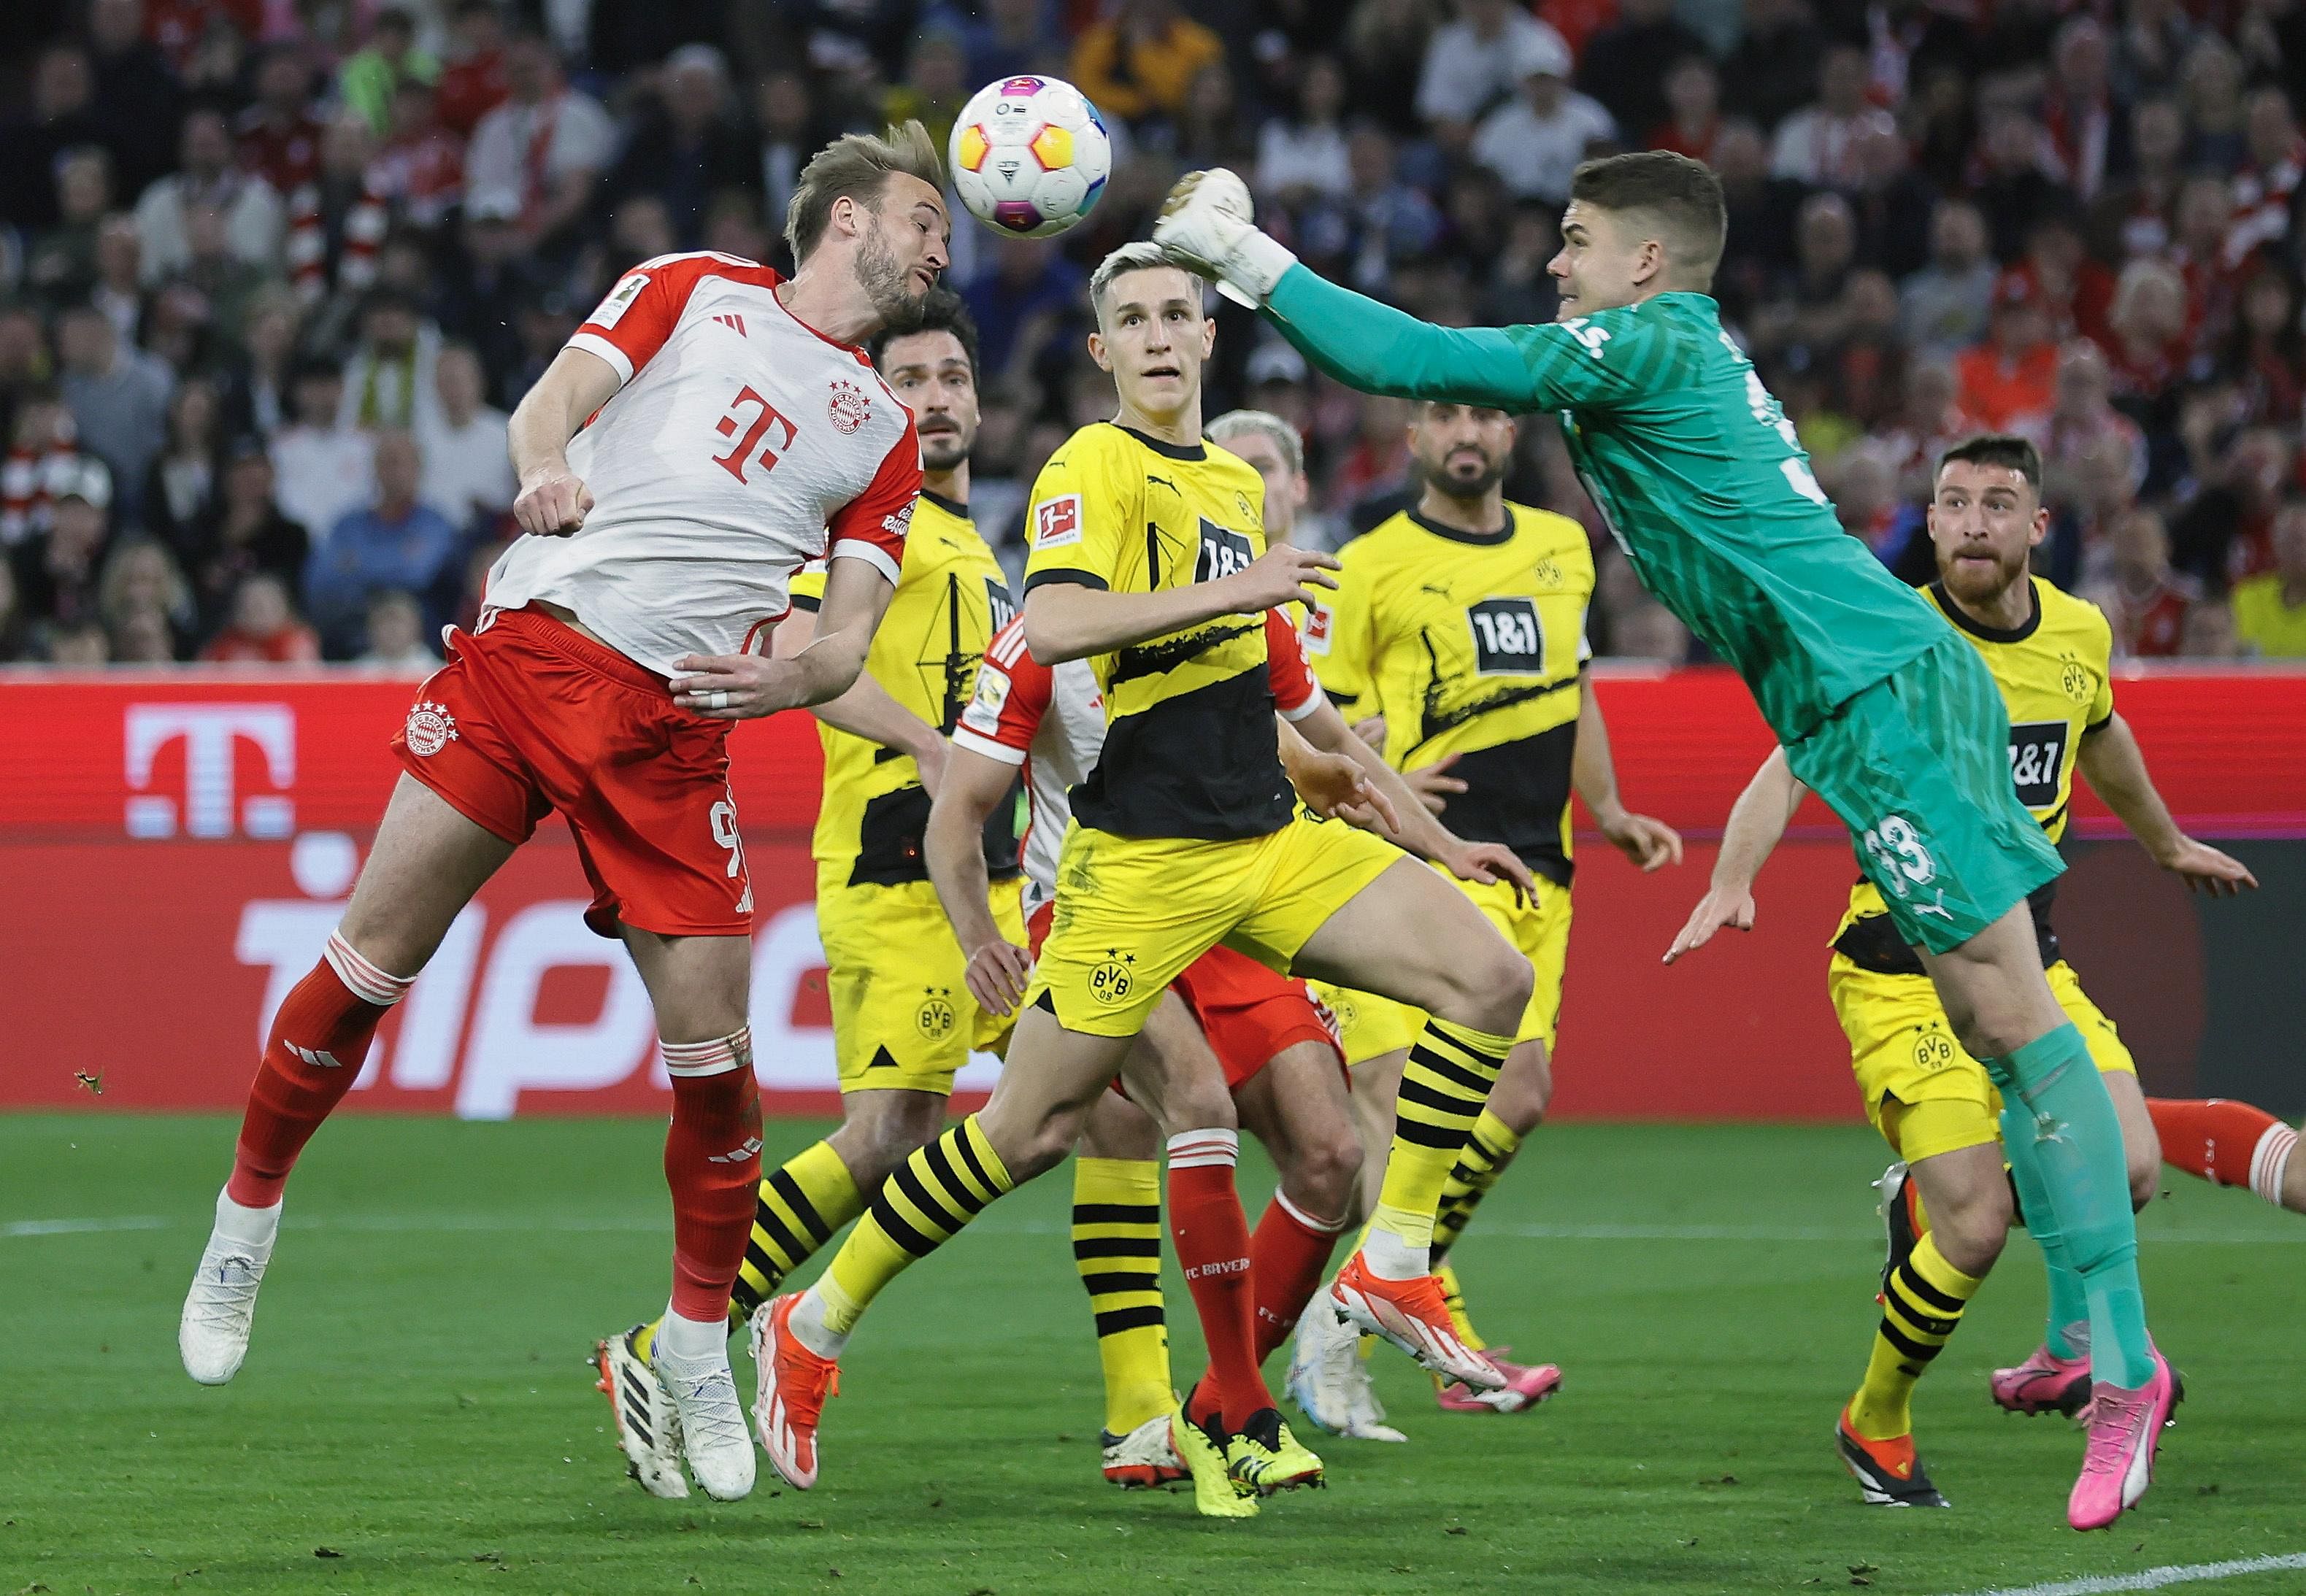 Tuchel concedes title race is over as Bayern’s defeat by Dortmund leaves Leverkusen 13 points clear